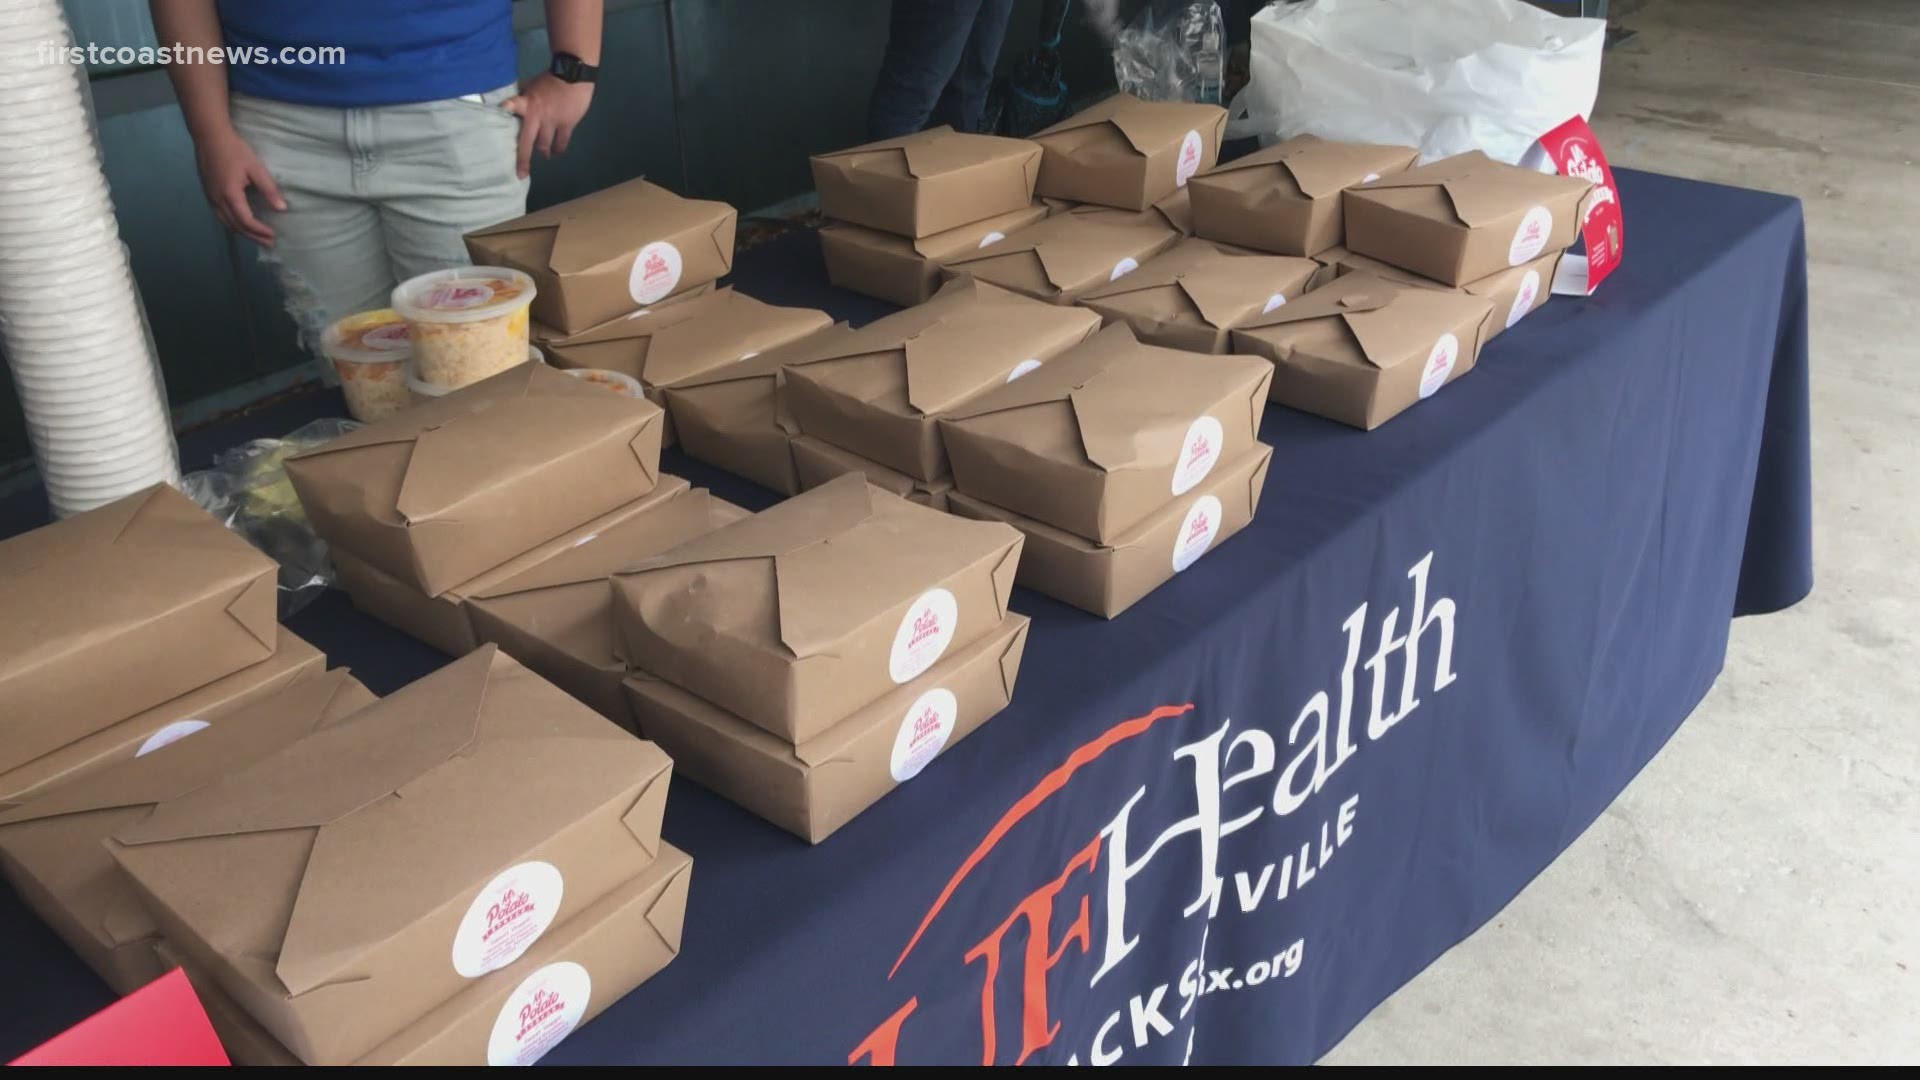 A local Rotary club is providing meals for heroes.